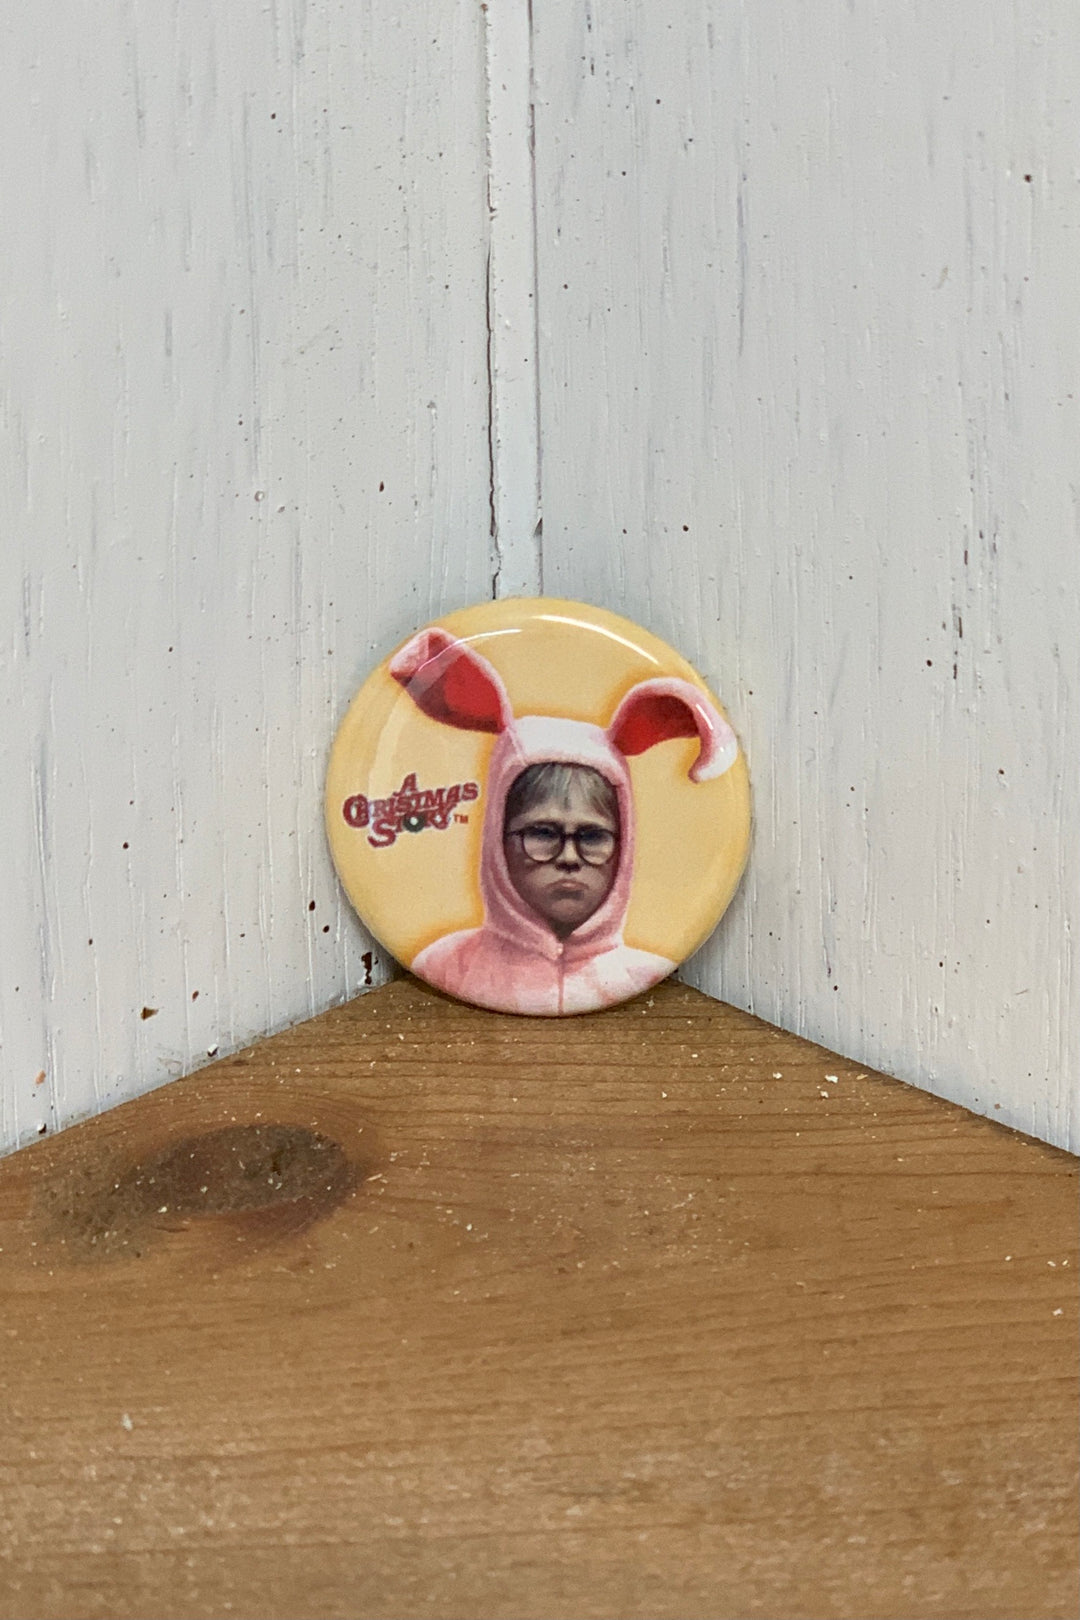 A Christmas Story Movie Magnets & Buttons